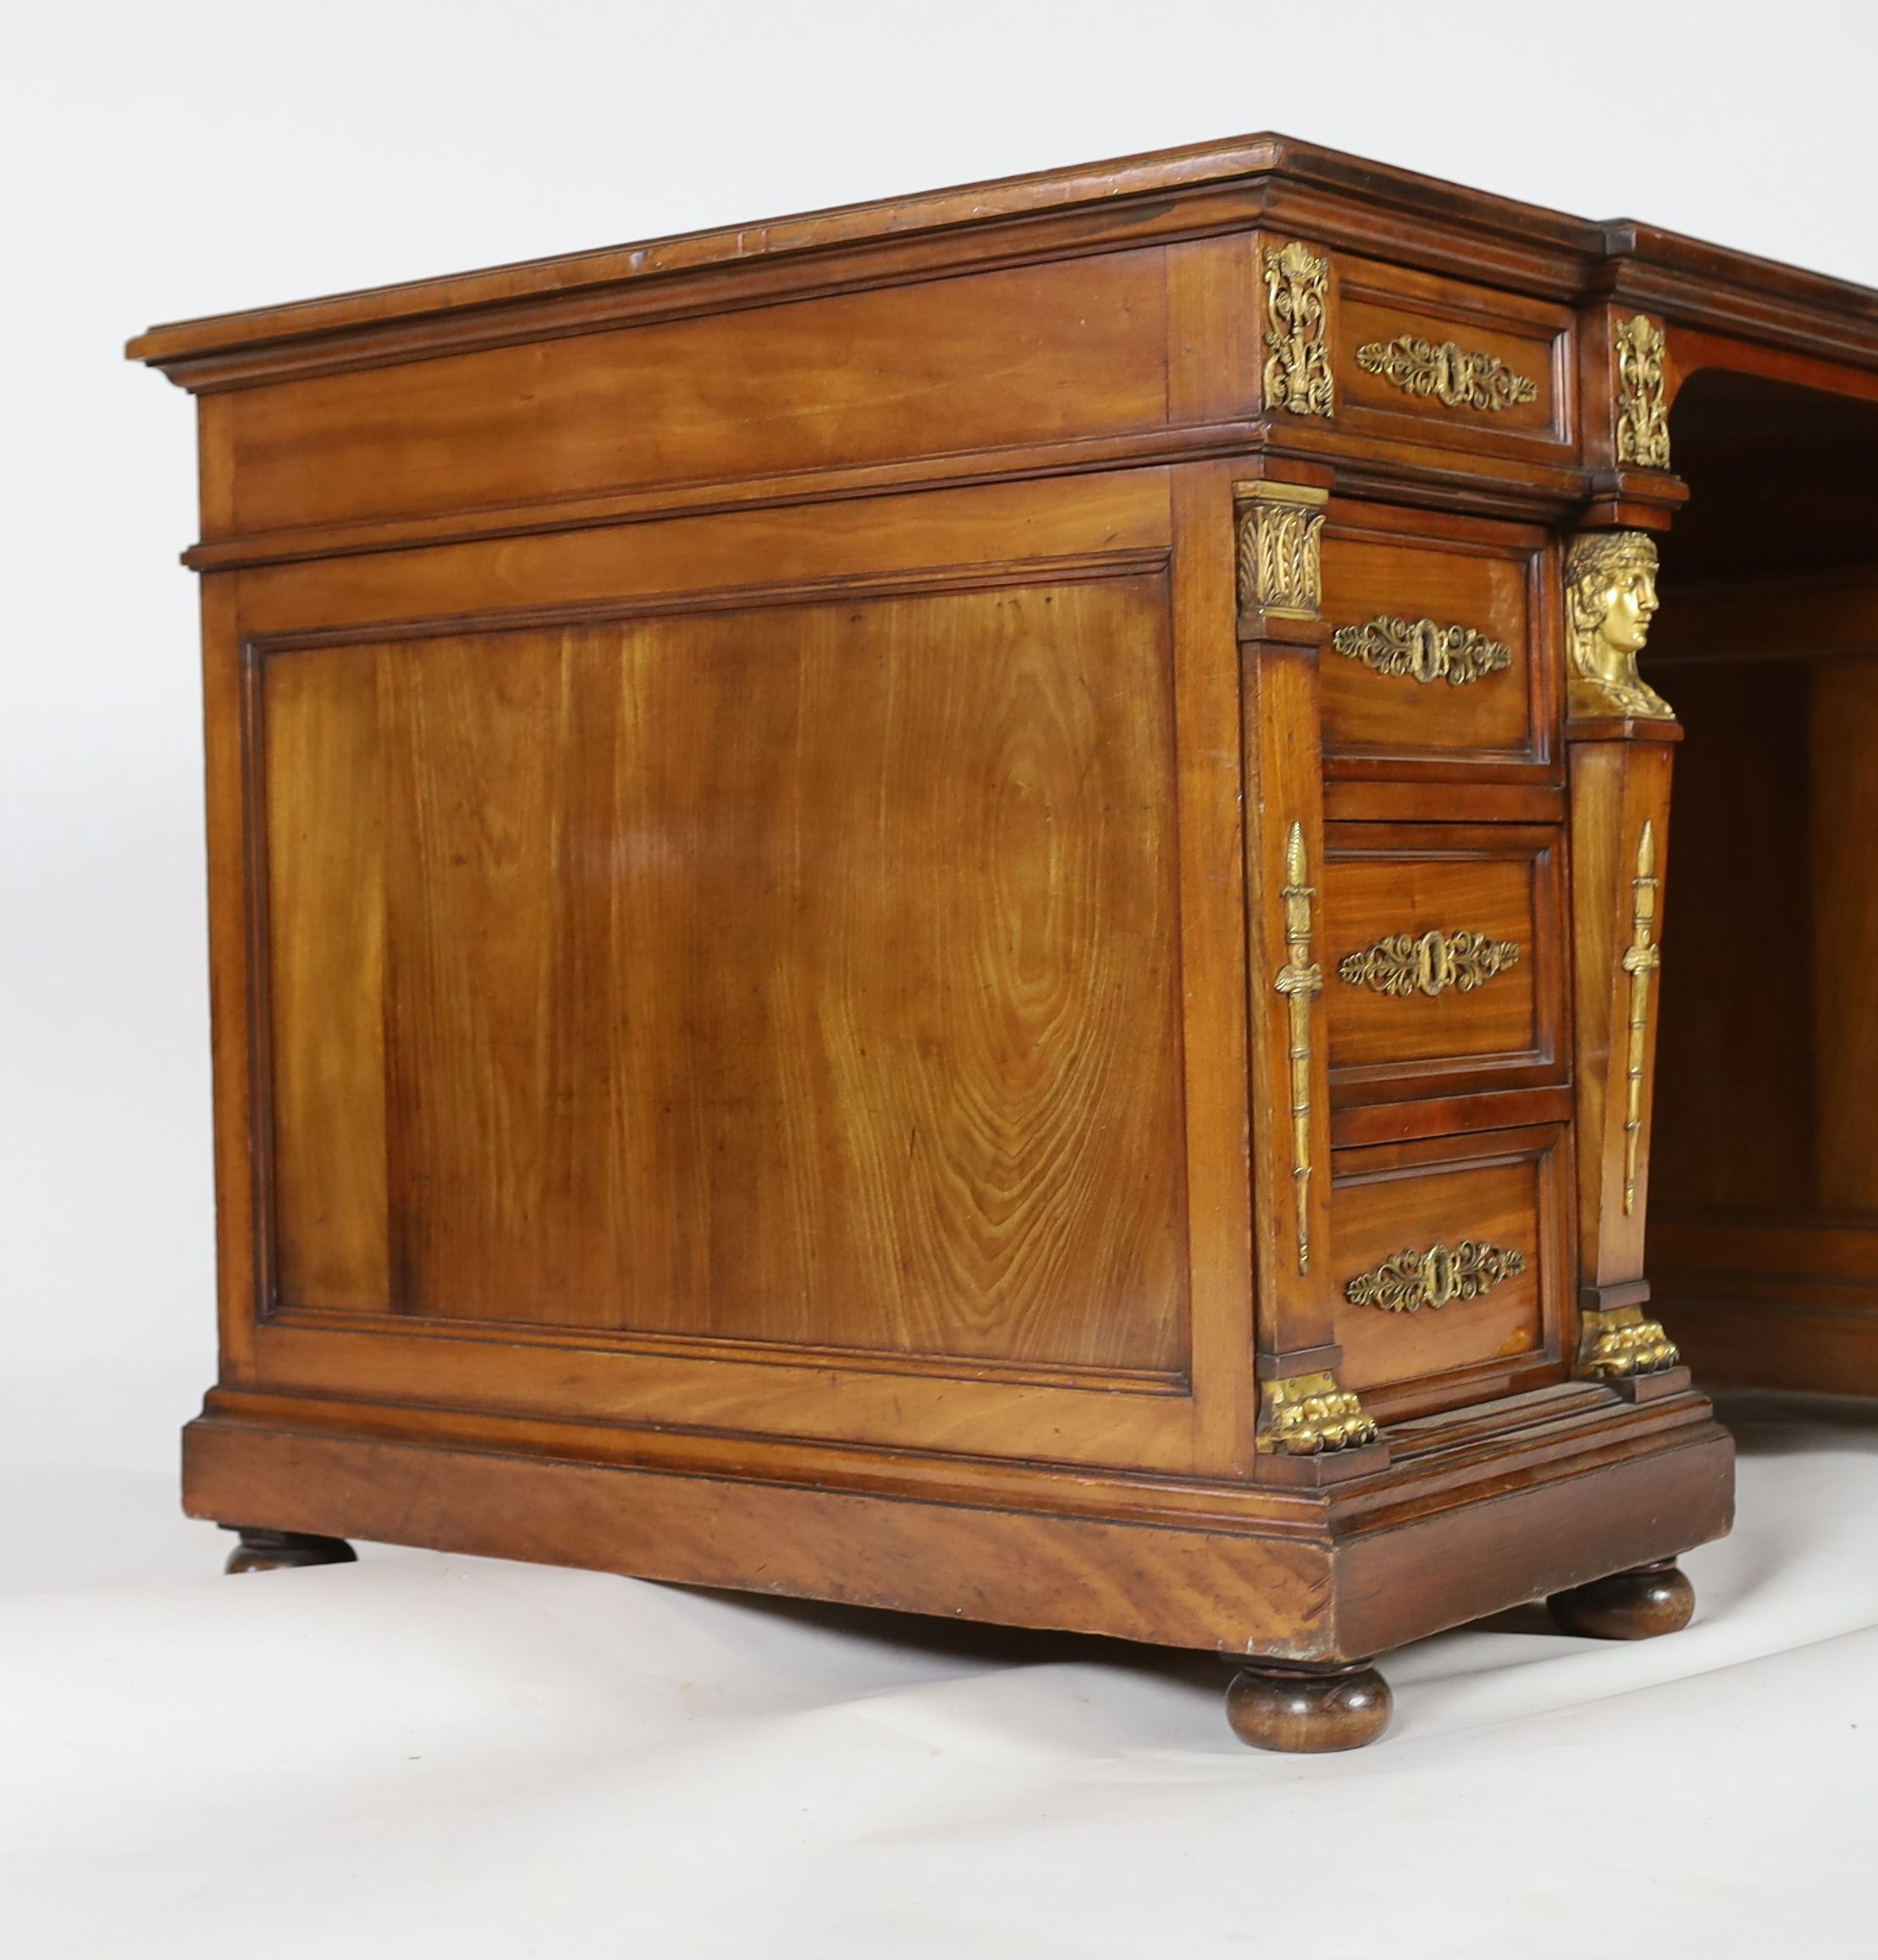 An early 20th century French classical revival mahogany breakfront pedestal desk, W.135cm D.82cm H.75cm